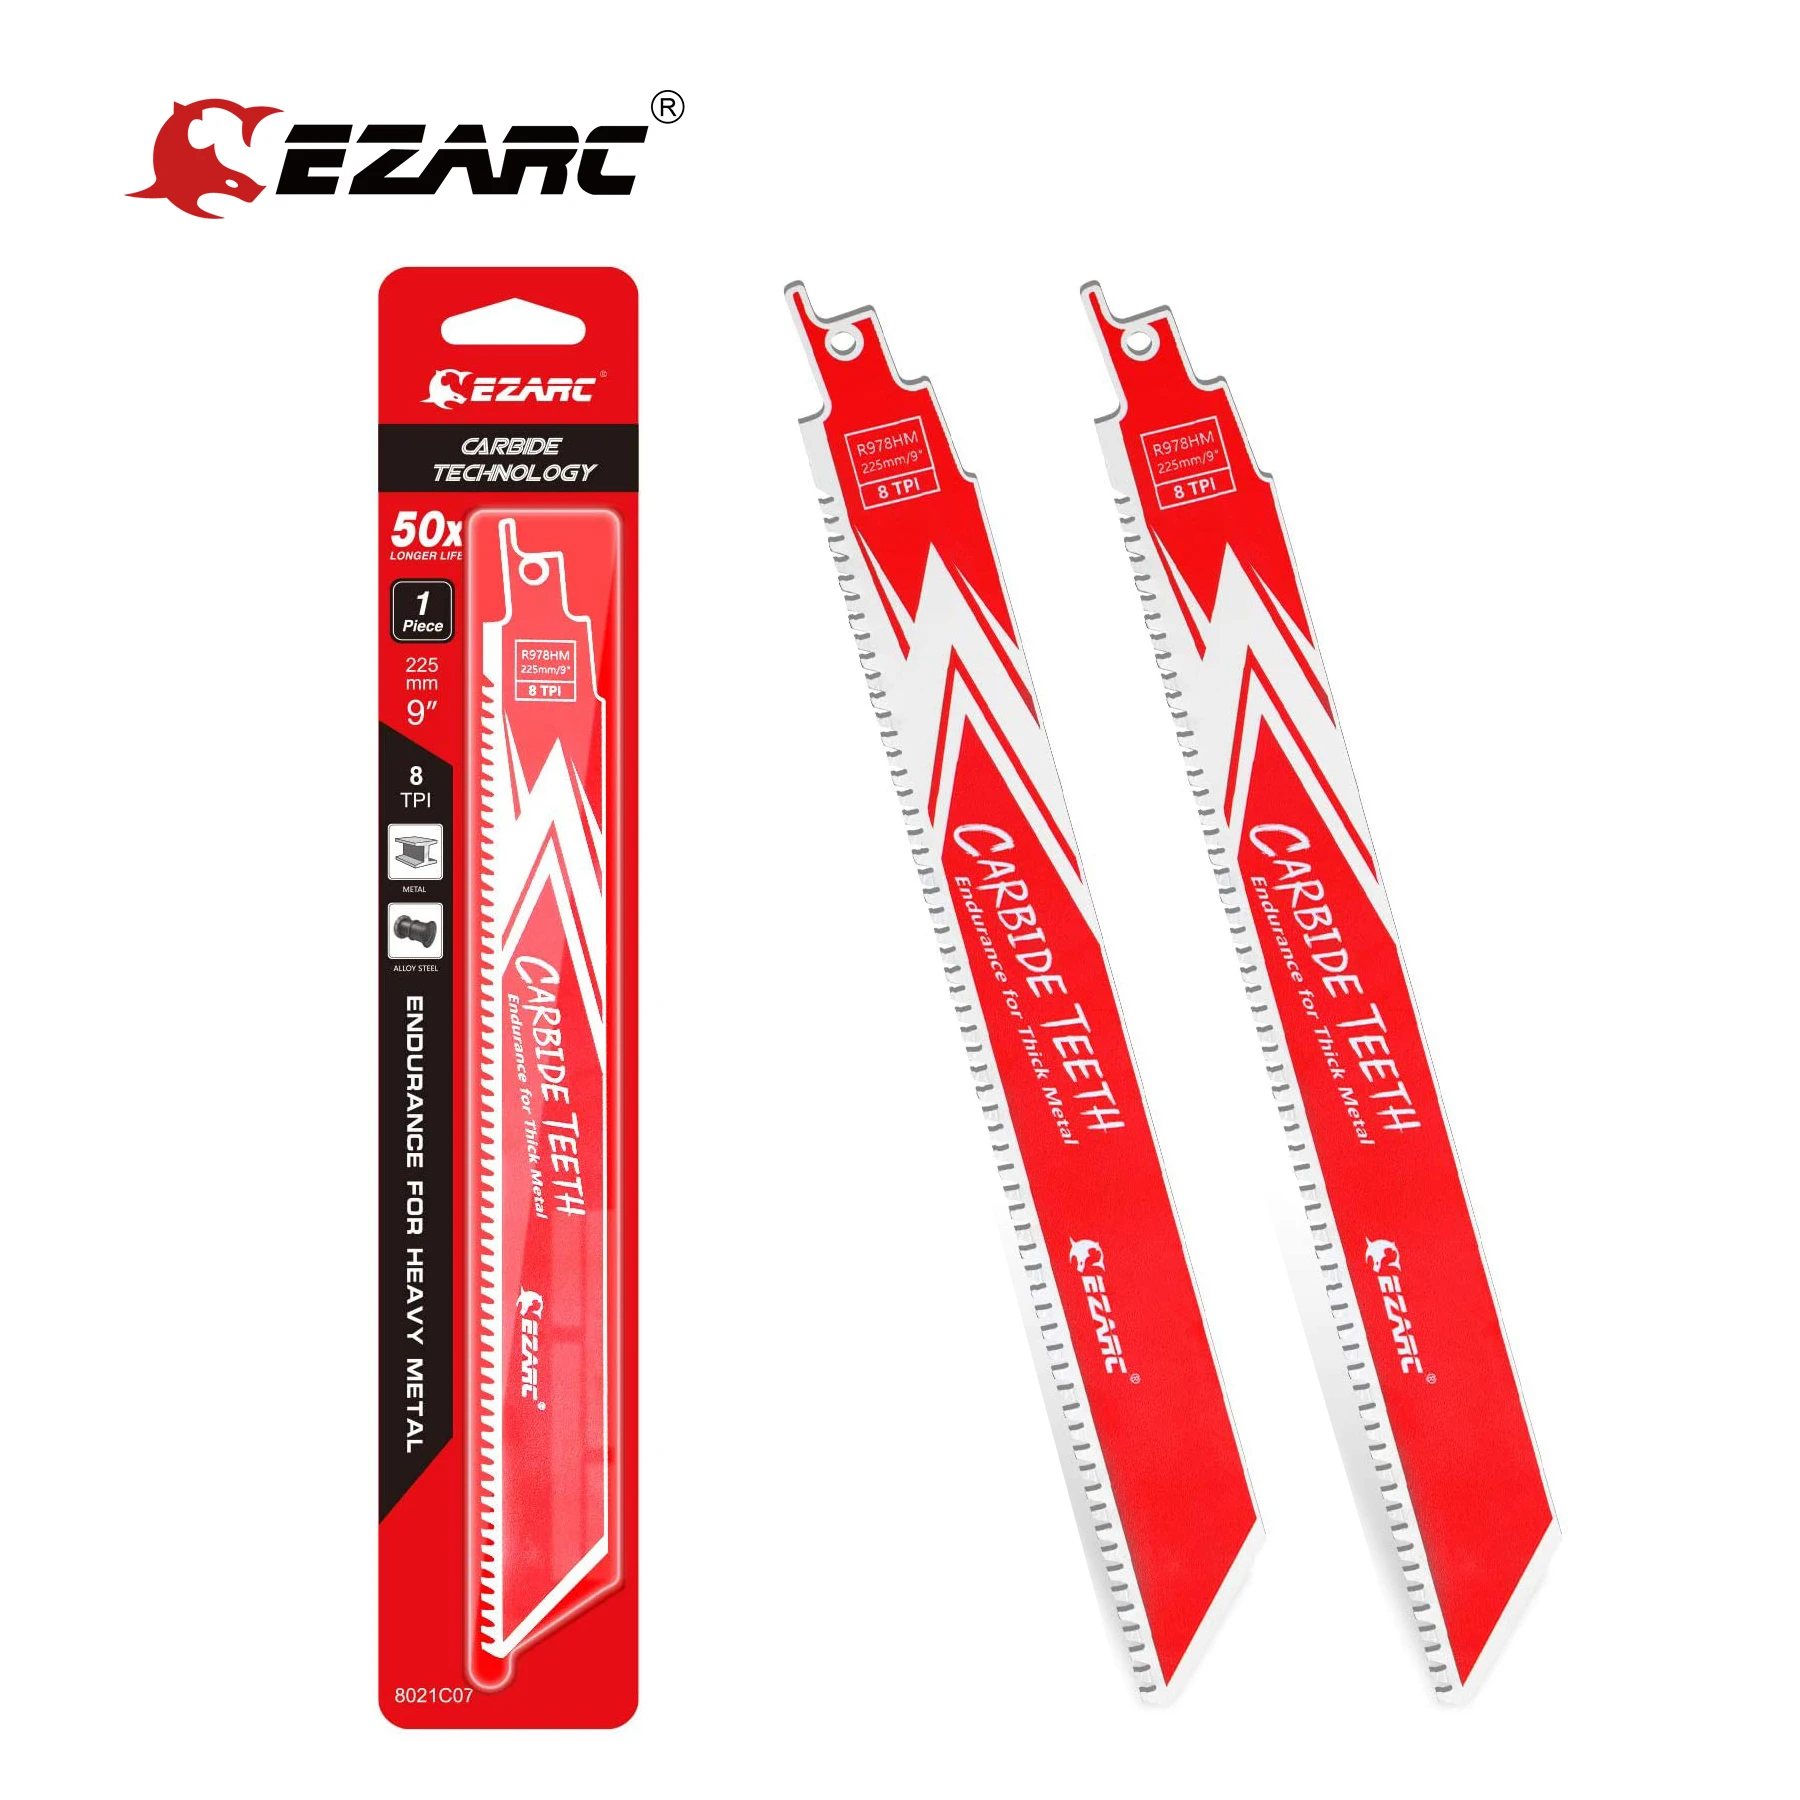 EZARC Carbide Reciprocating Saw Blade R978HM Endurance for Thick Metal, Cast Iron, Alloy Steel 9-Inch 8TPI, 1/2/3 Pack